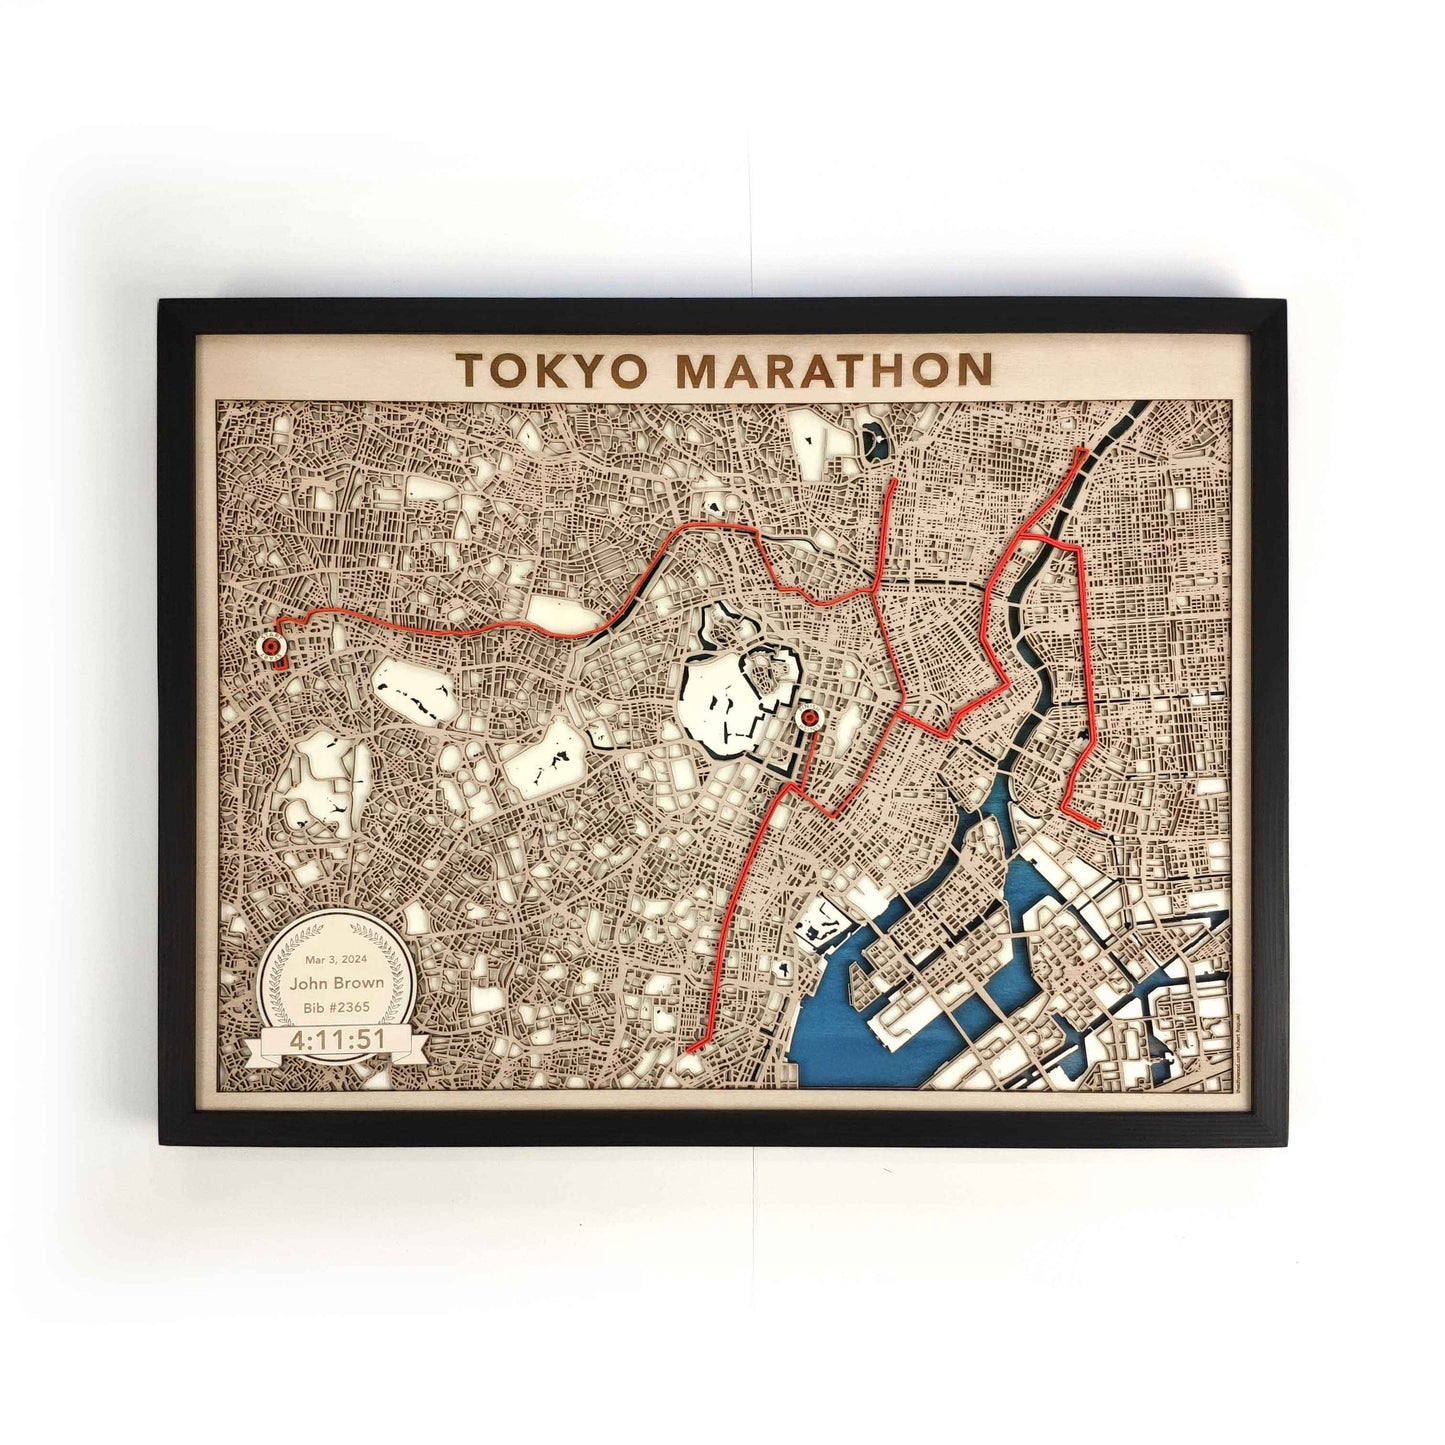 Tokyo Marathon Course Map - Wall Art Gift by CityWood - Custom Wood Map Art - Unique Laser Cut Engraved - Anniversary Gift